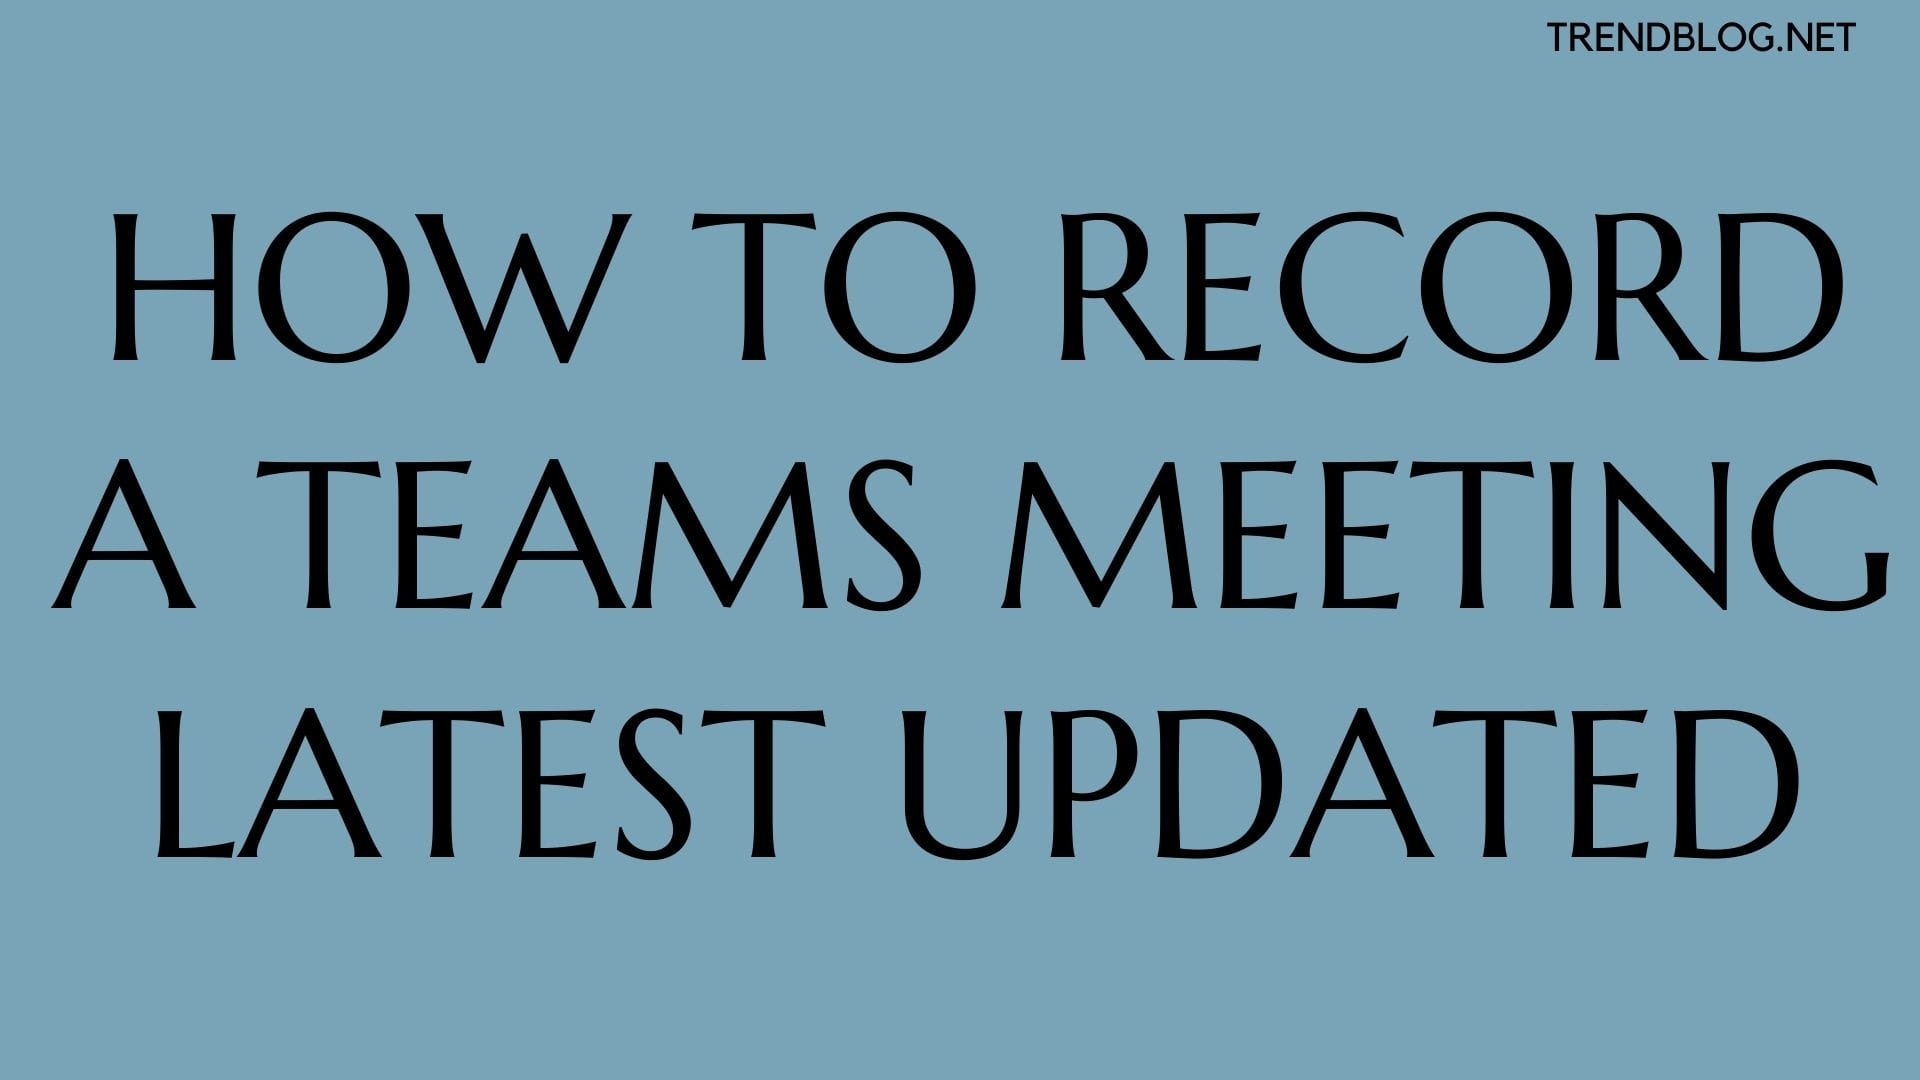  How to Record a Teams Meeting Latest Updated